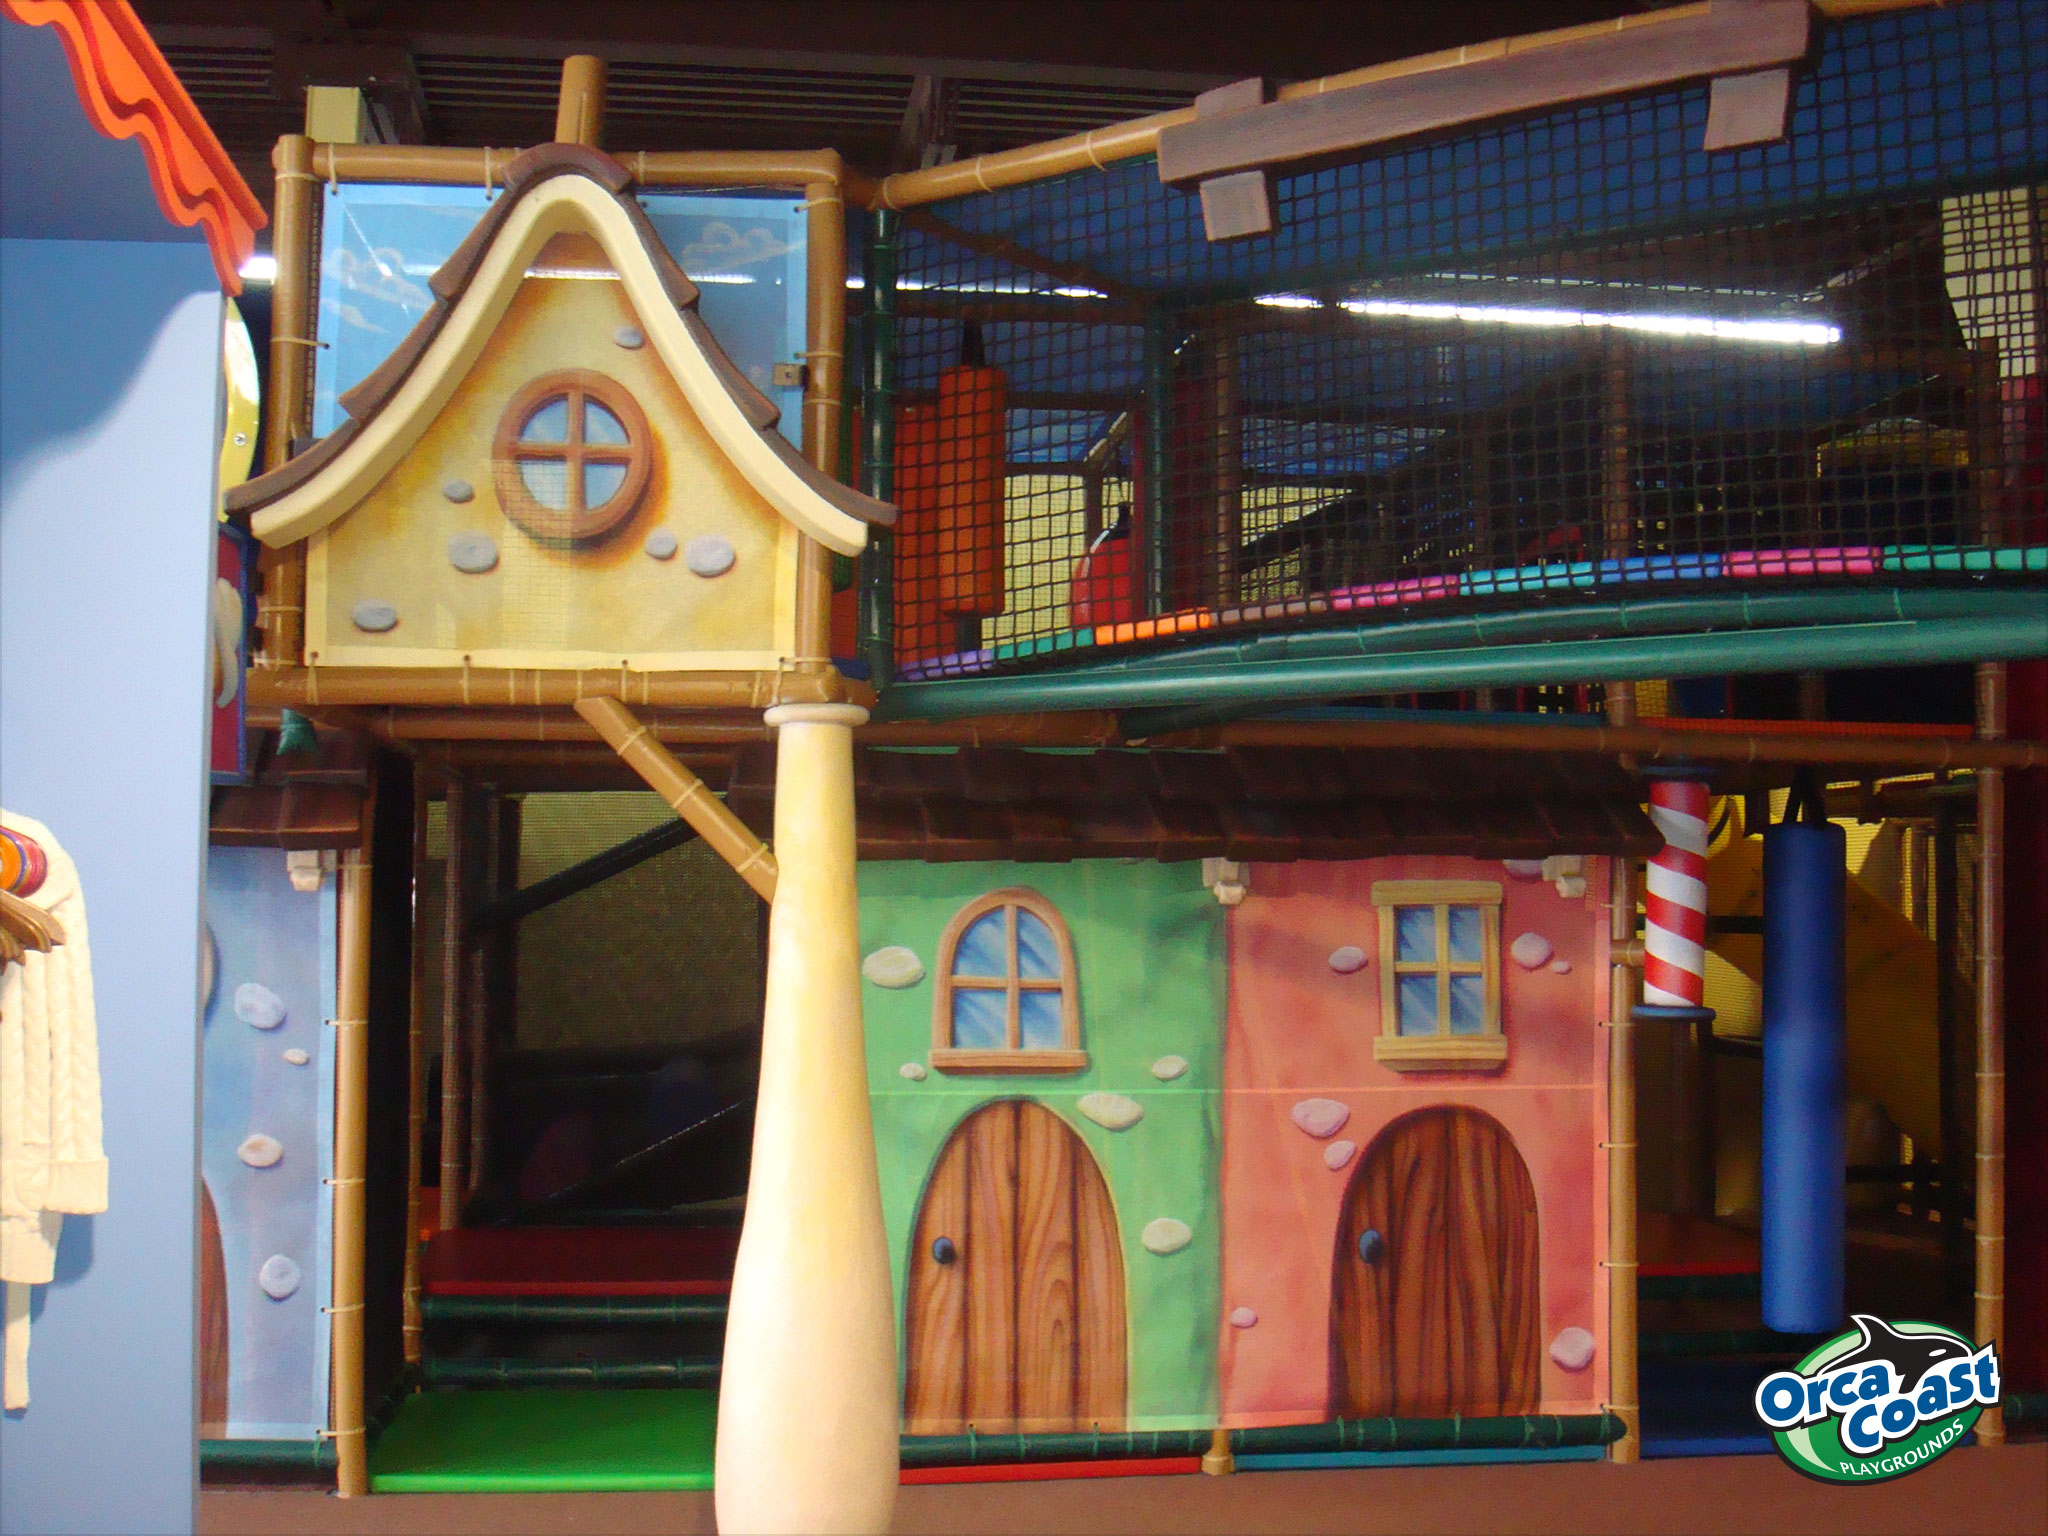 Kazoom Café, a playhouse-themed indoor playground in Quebec